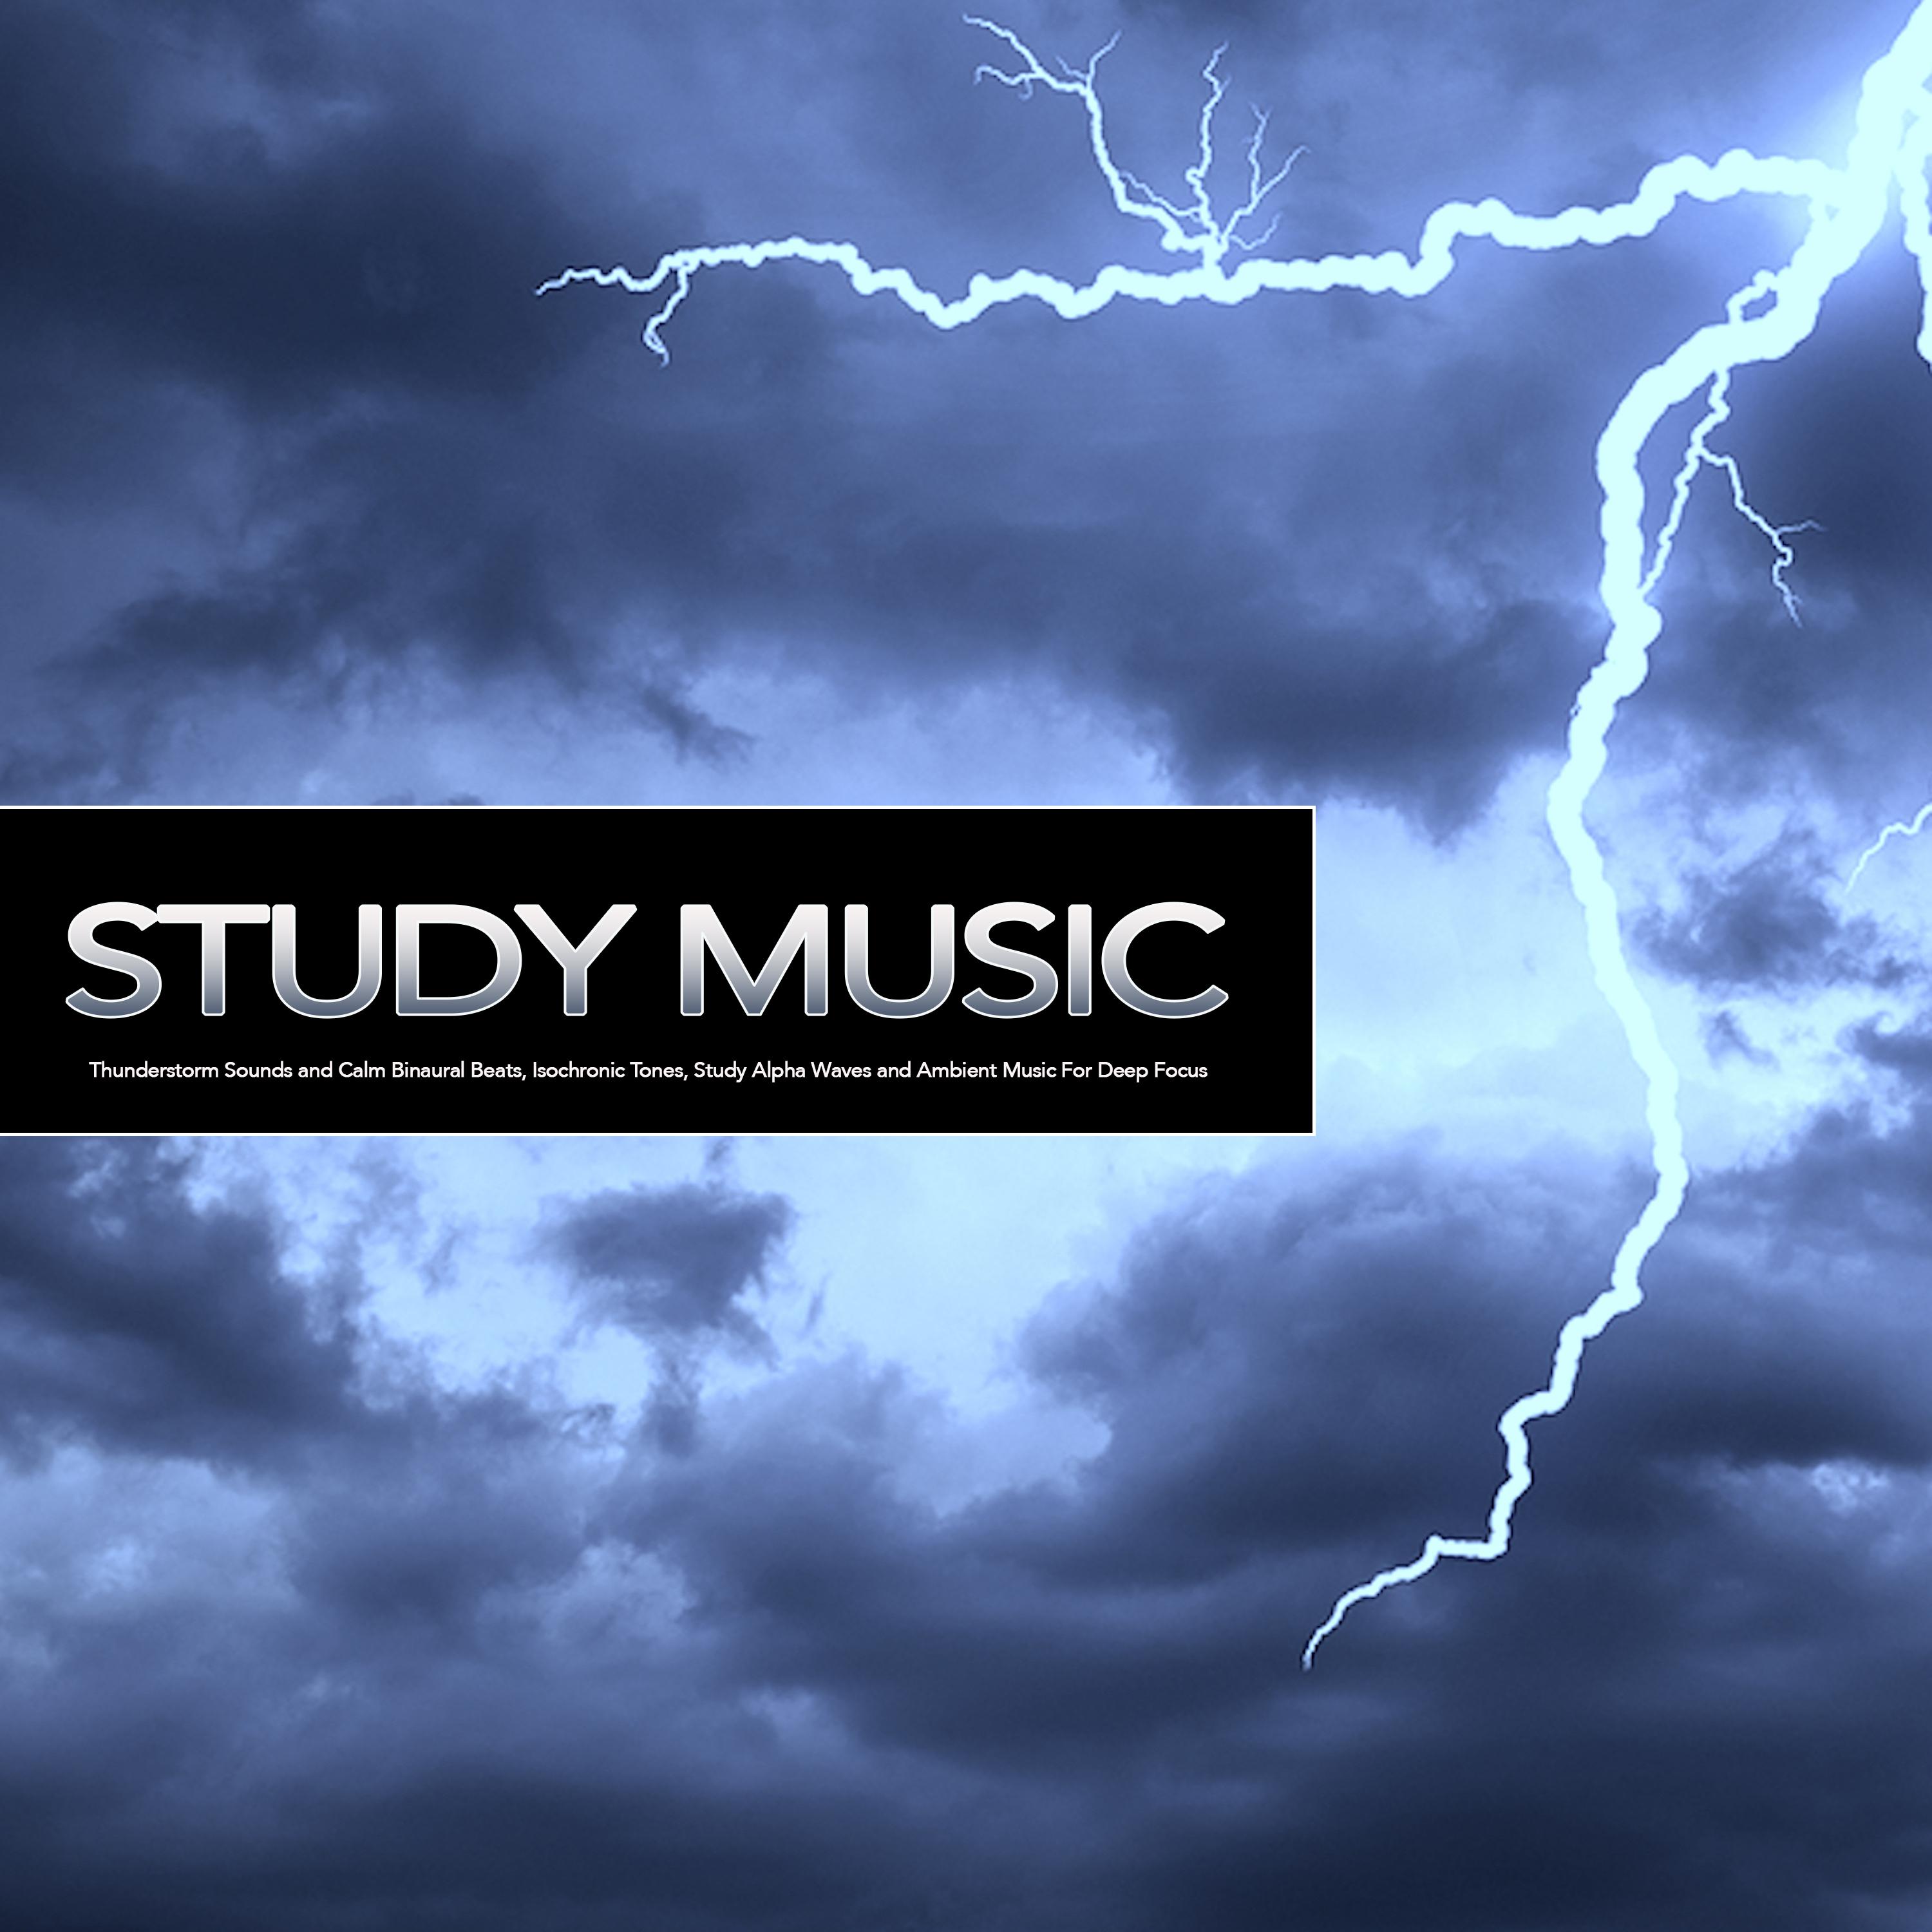 Study Music: Thunderstorm Sounds and Calm Binaural Beats, Isochronic Tones, Study Alpha Waves and Ambient Music For Deep Focus